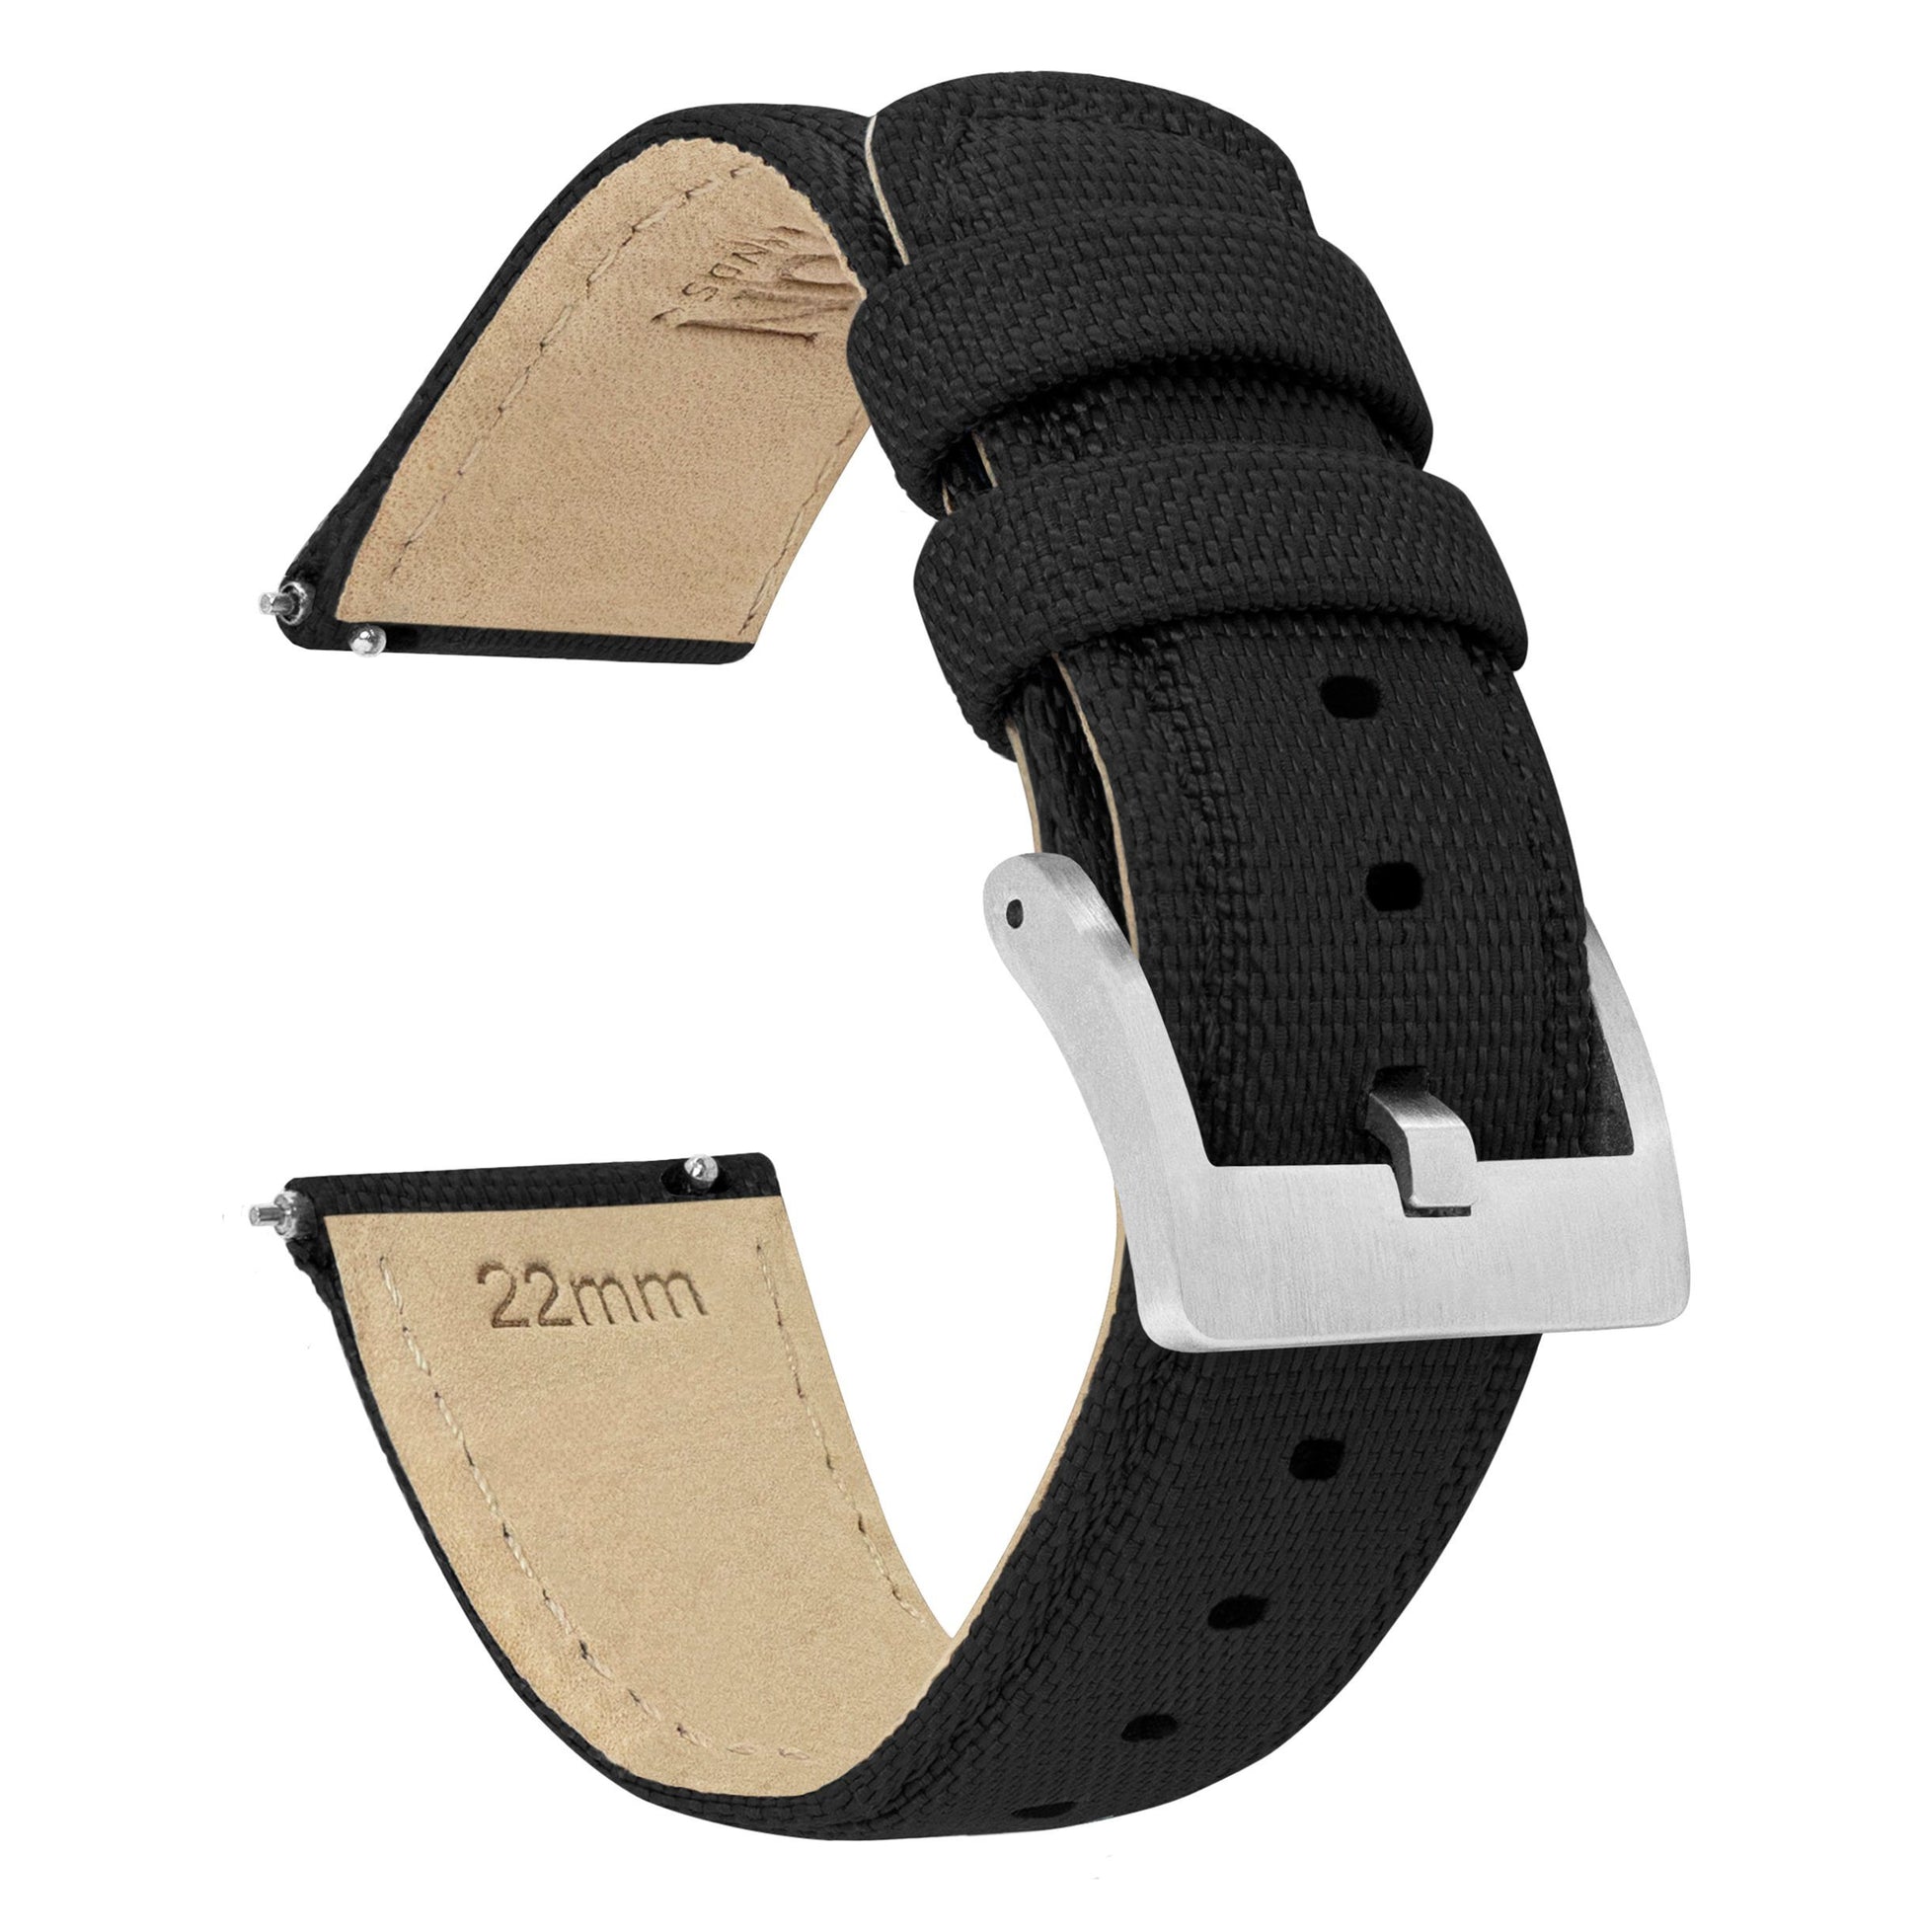 Pebble Smart Watches | Sailcloth Quick Release | Black - Barton Watch Bands